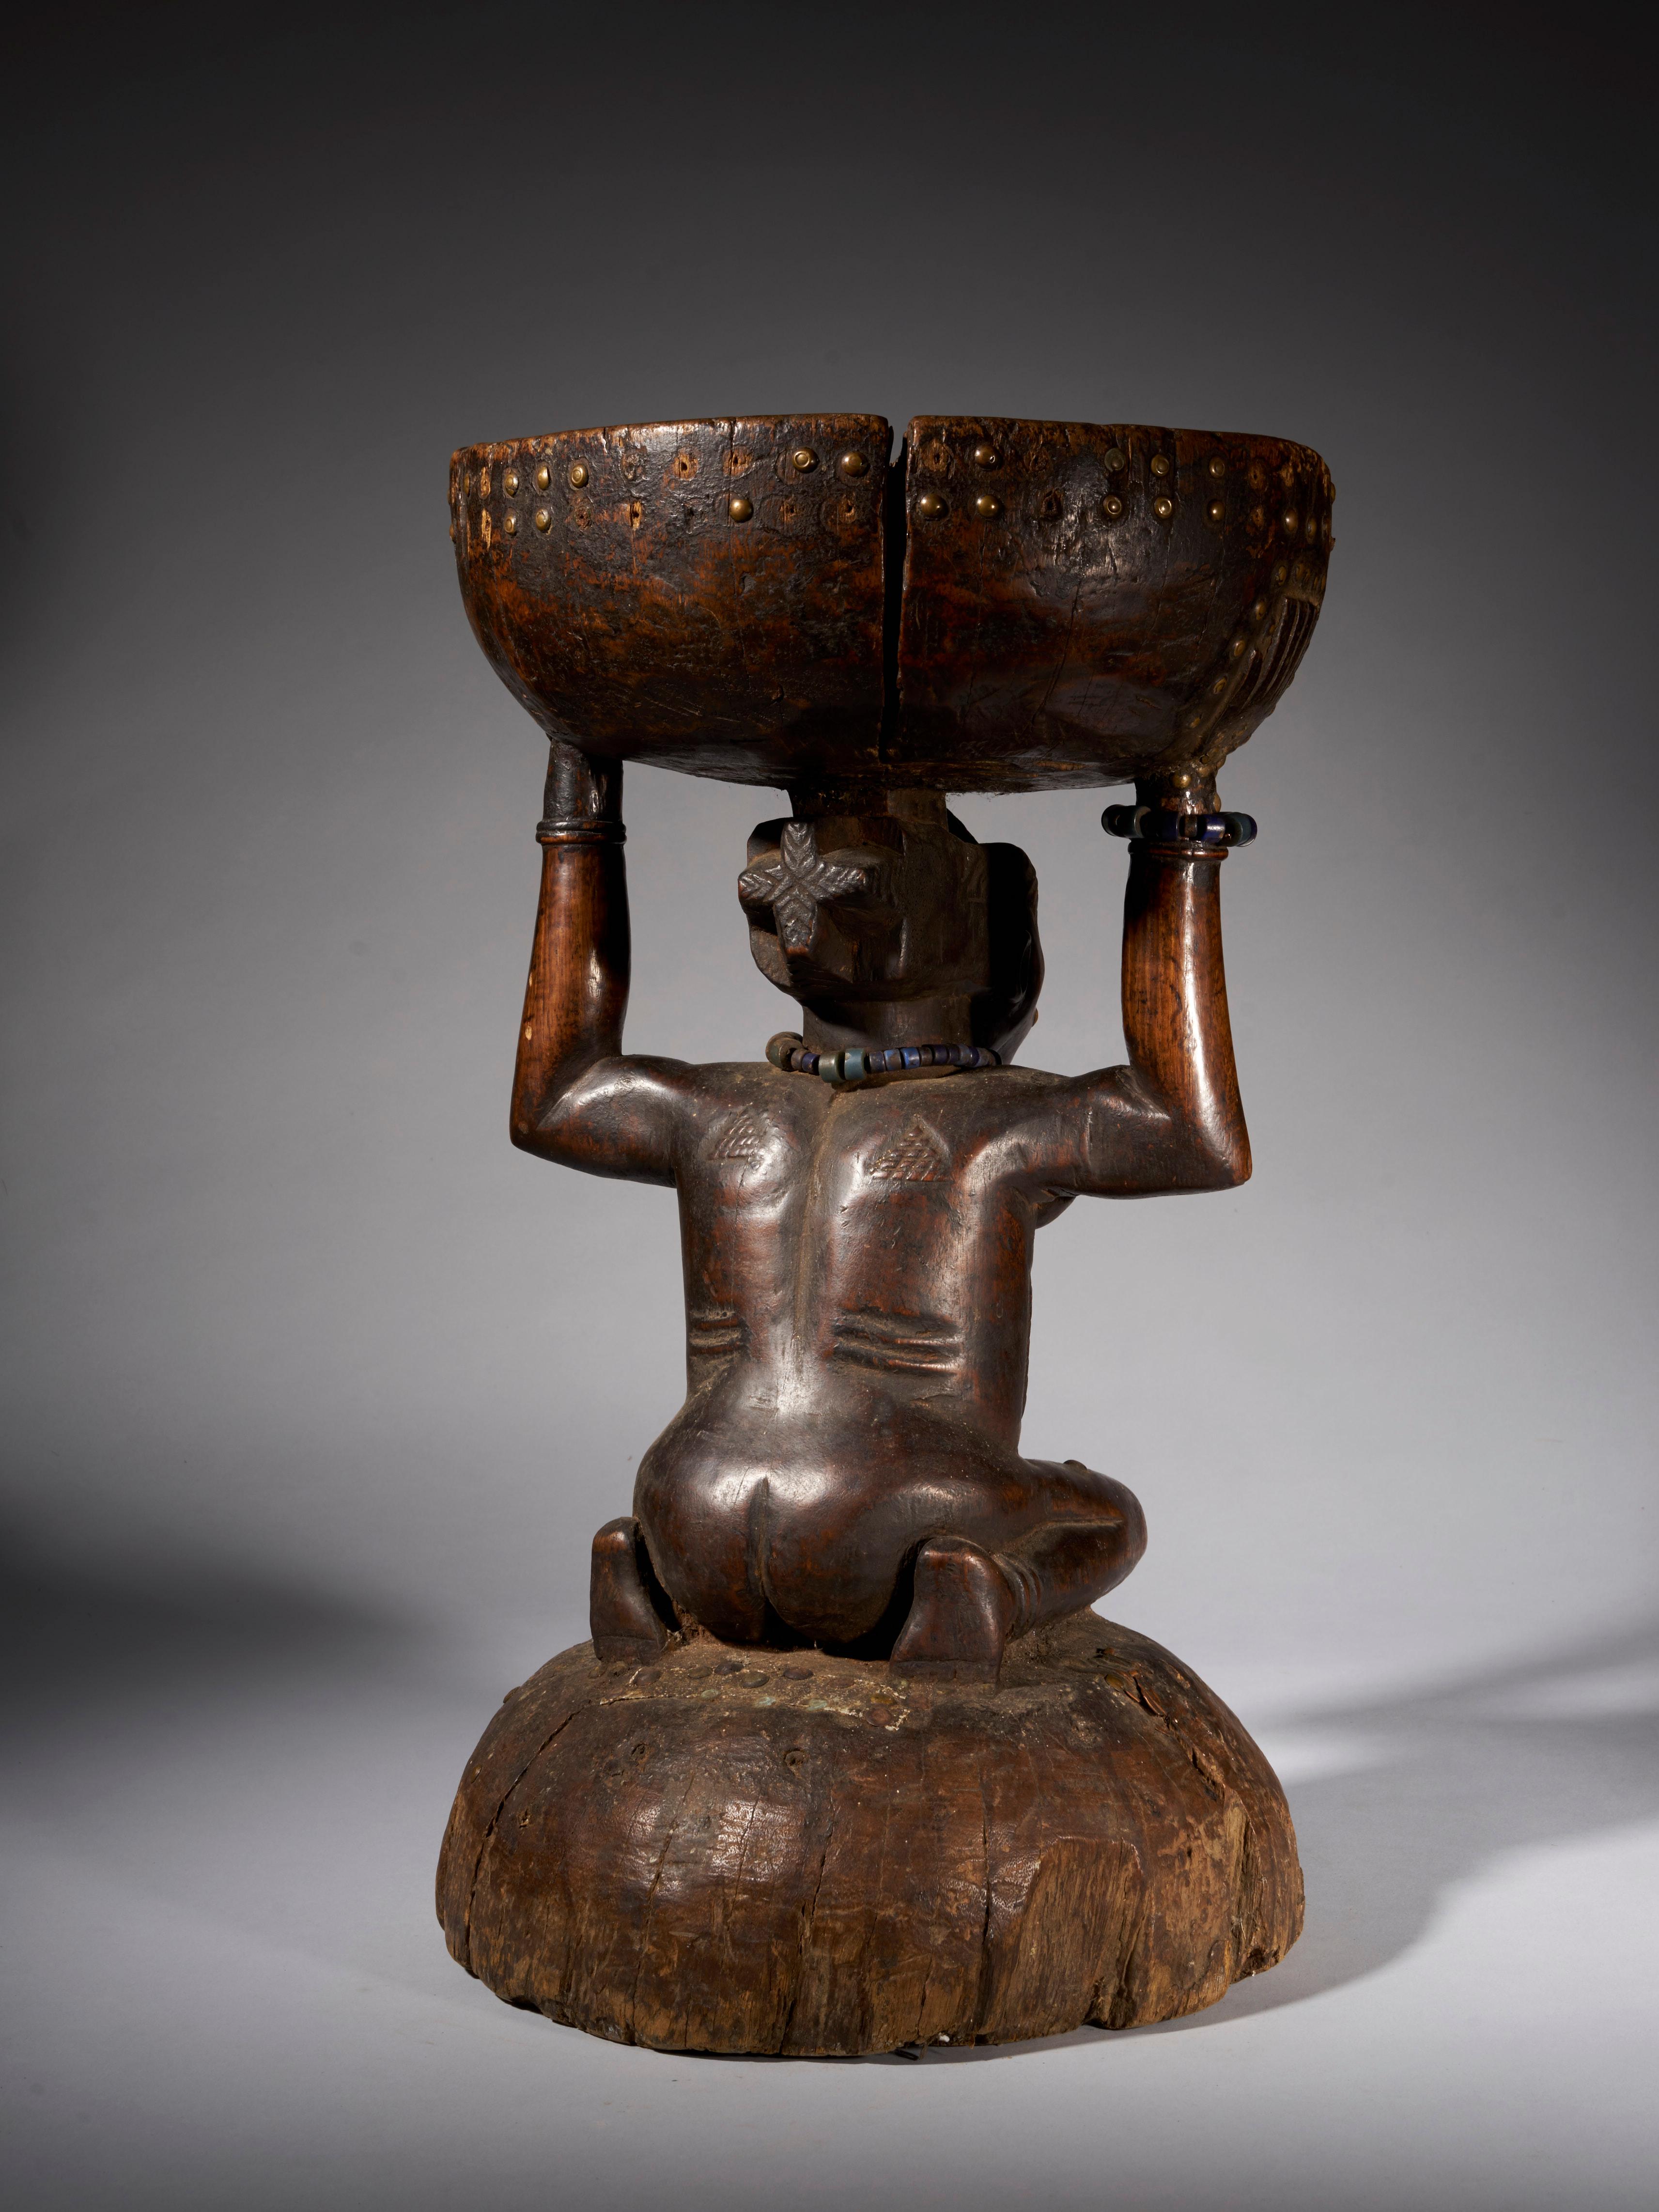 Hand-Carved Massive and Robust Zela Caryatide Stool Held by a Female Sculpture